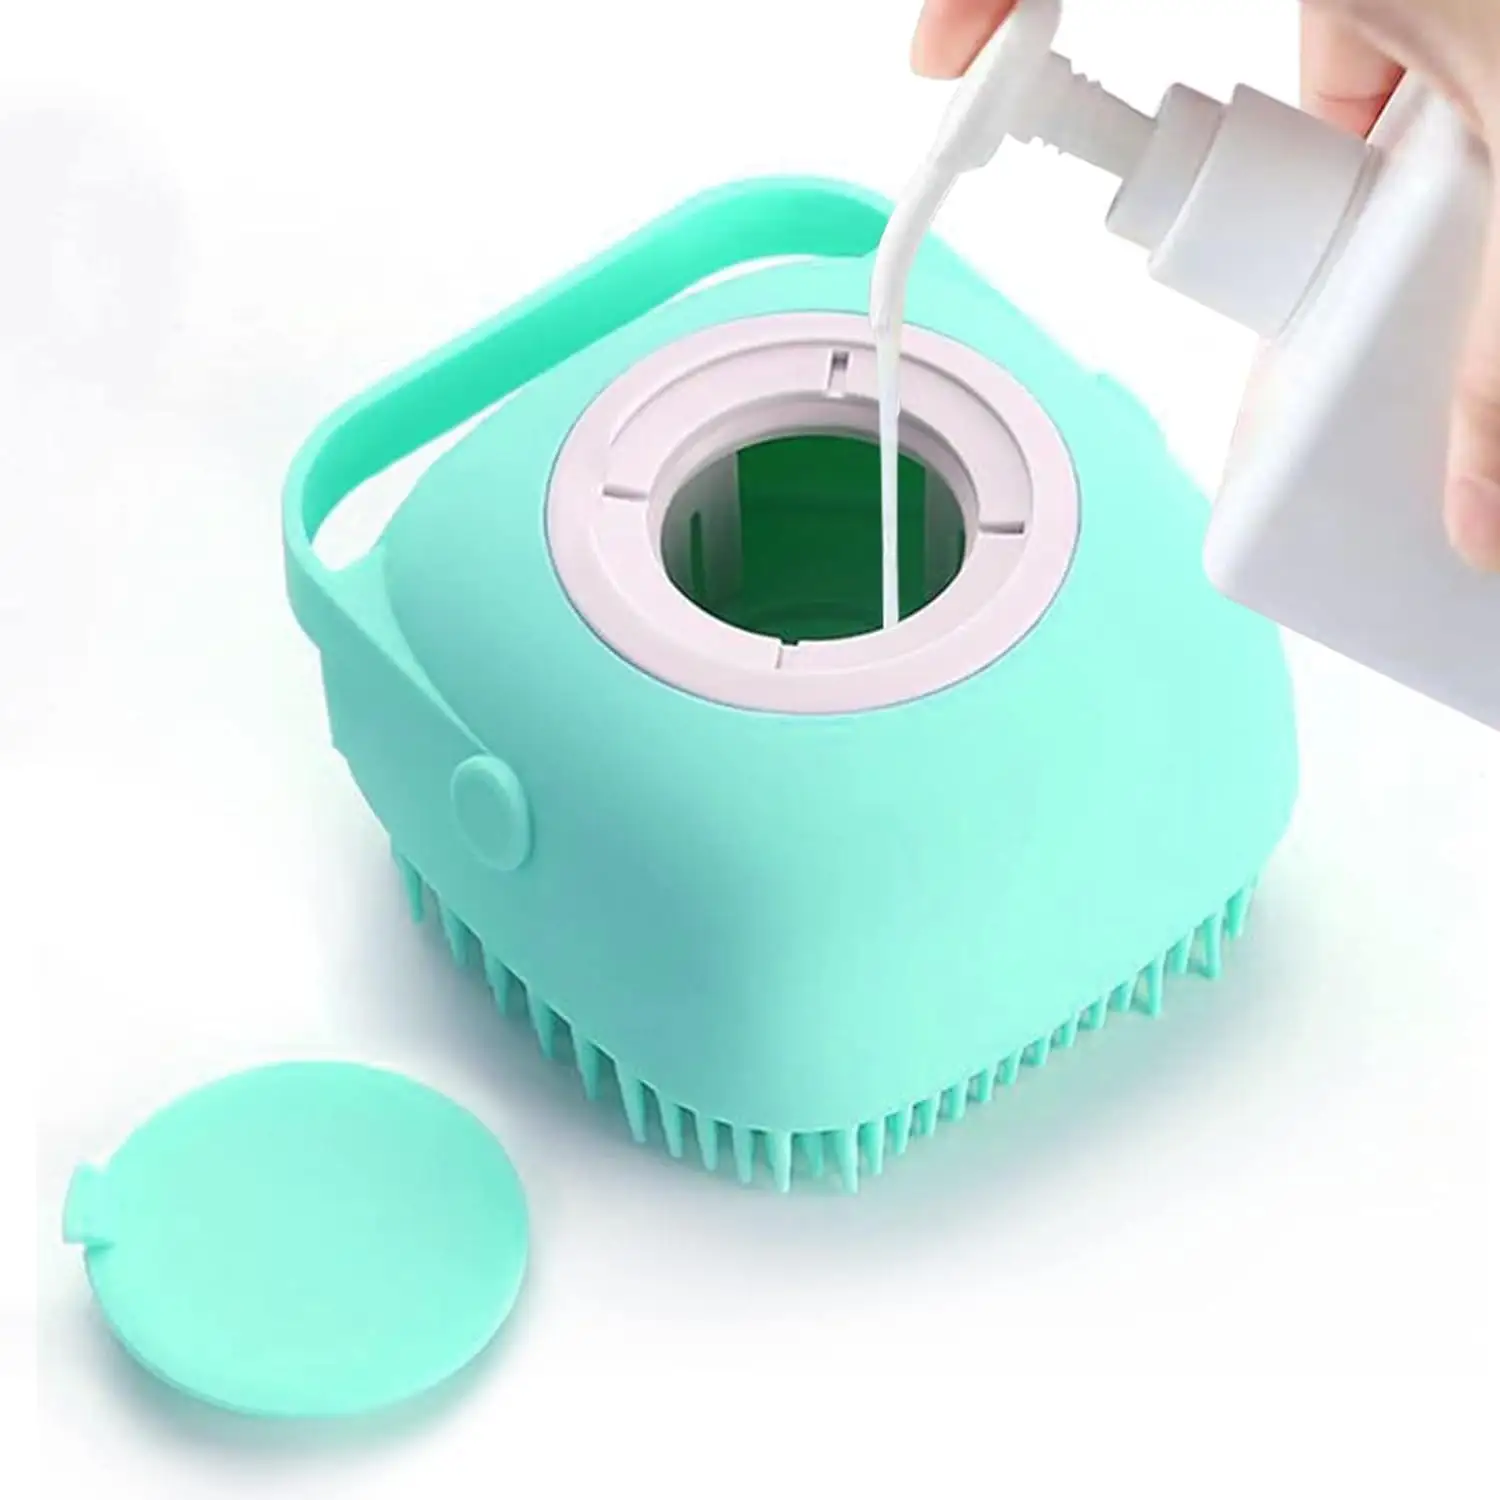 2 in 1 Soft Silicone Soap Dispenser Pet Grooming Cleaning Shower Shampoo Dispenser Cat Pets Bathing Products